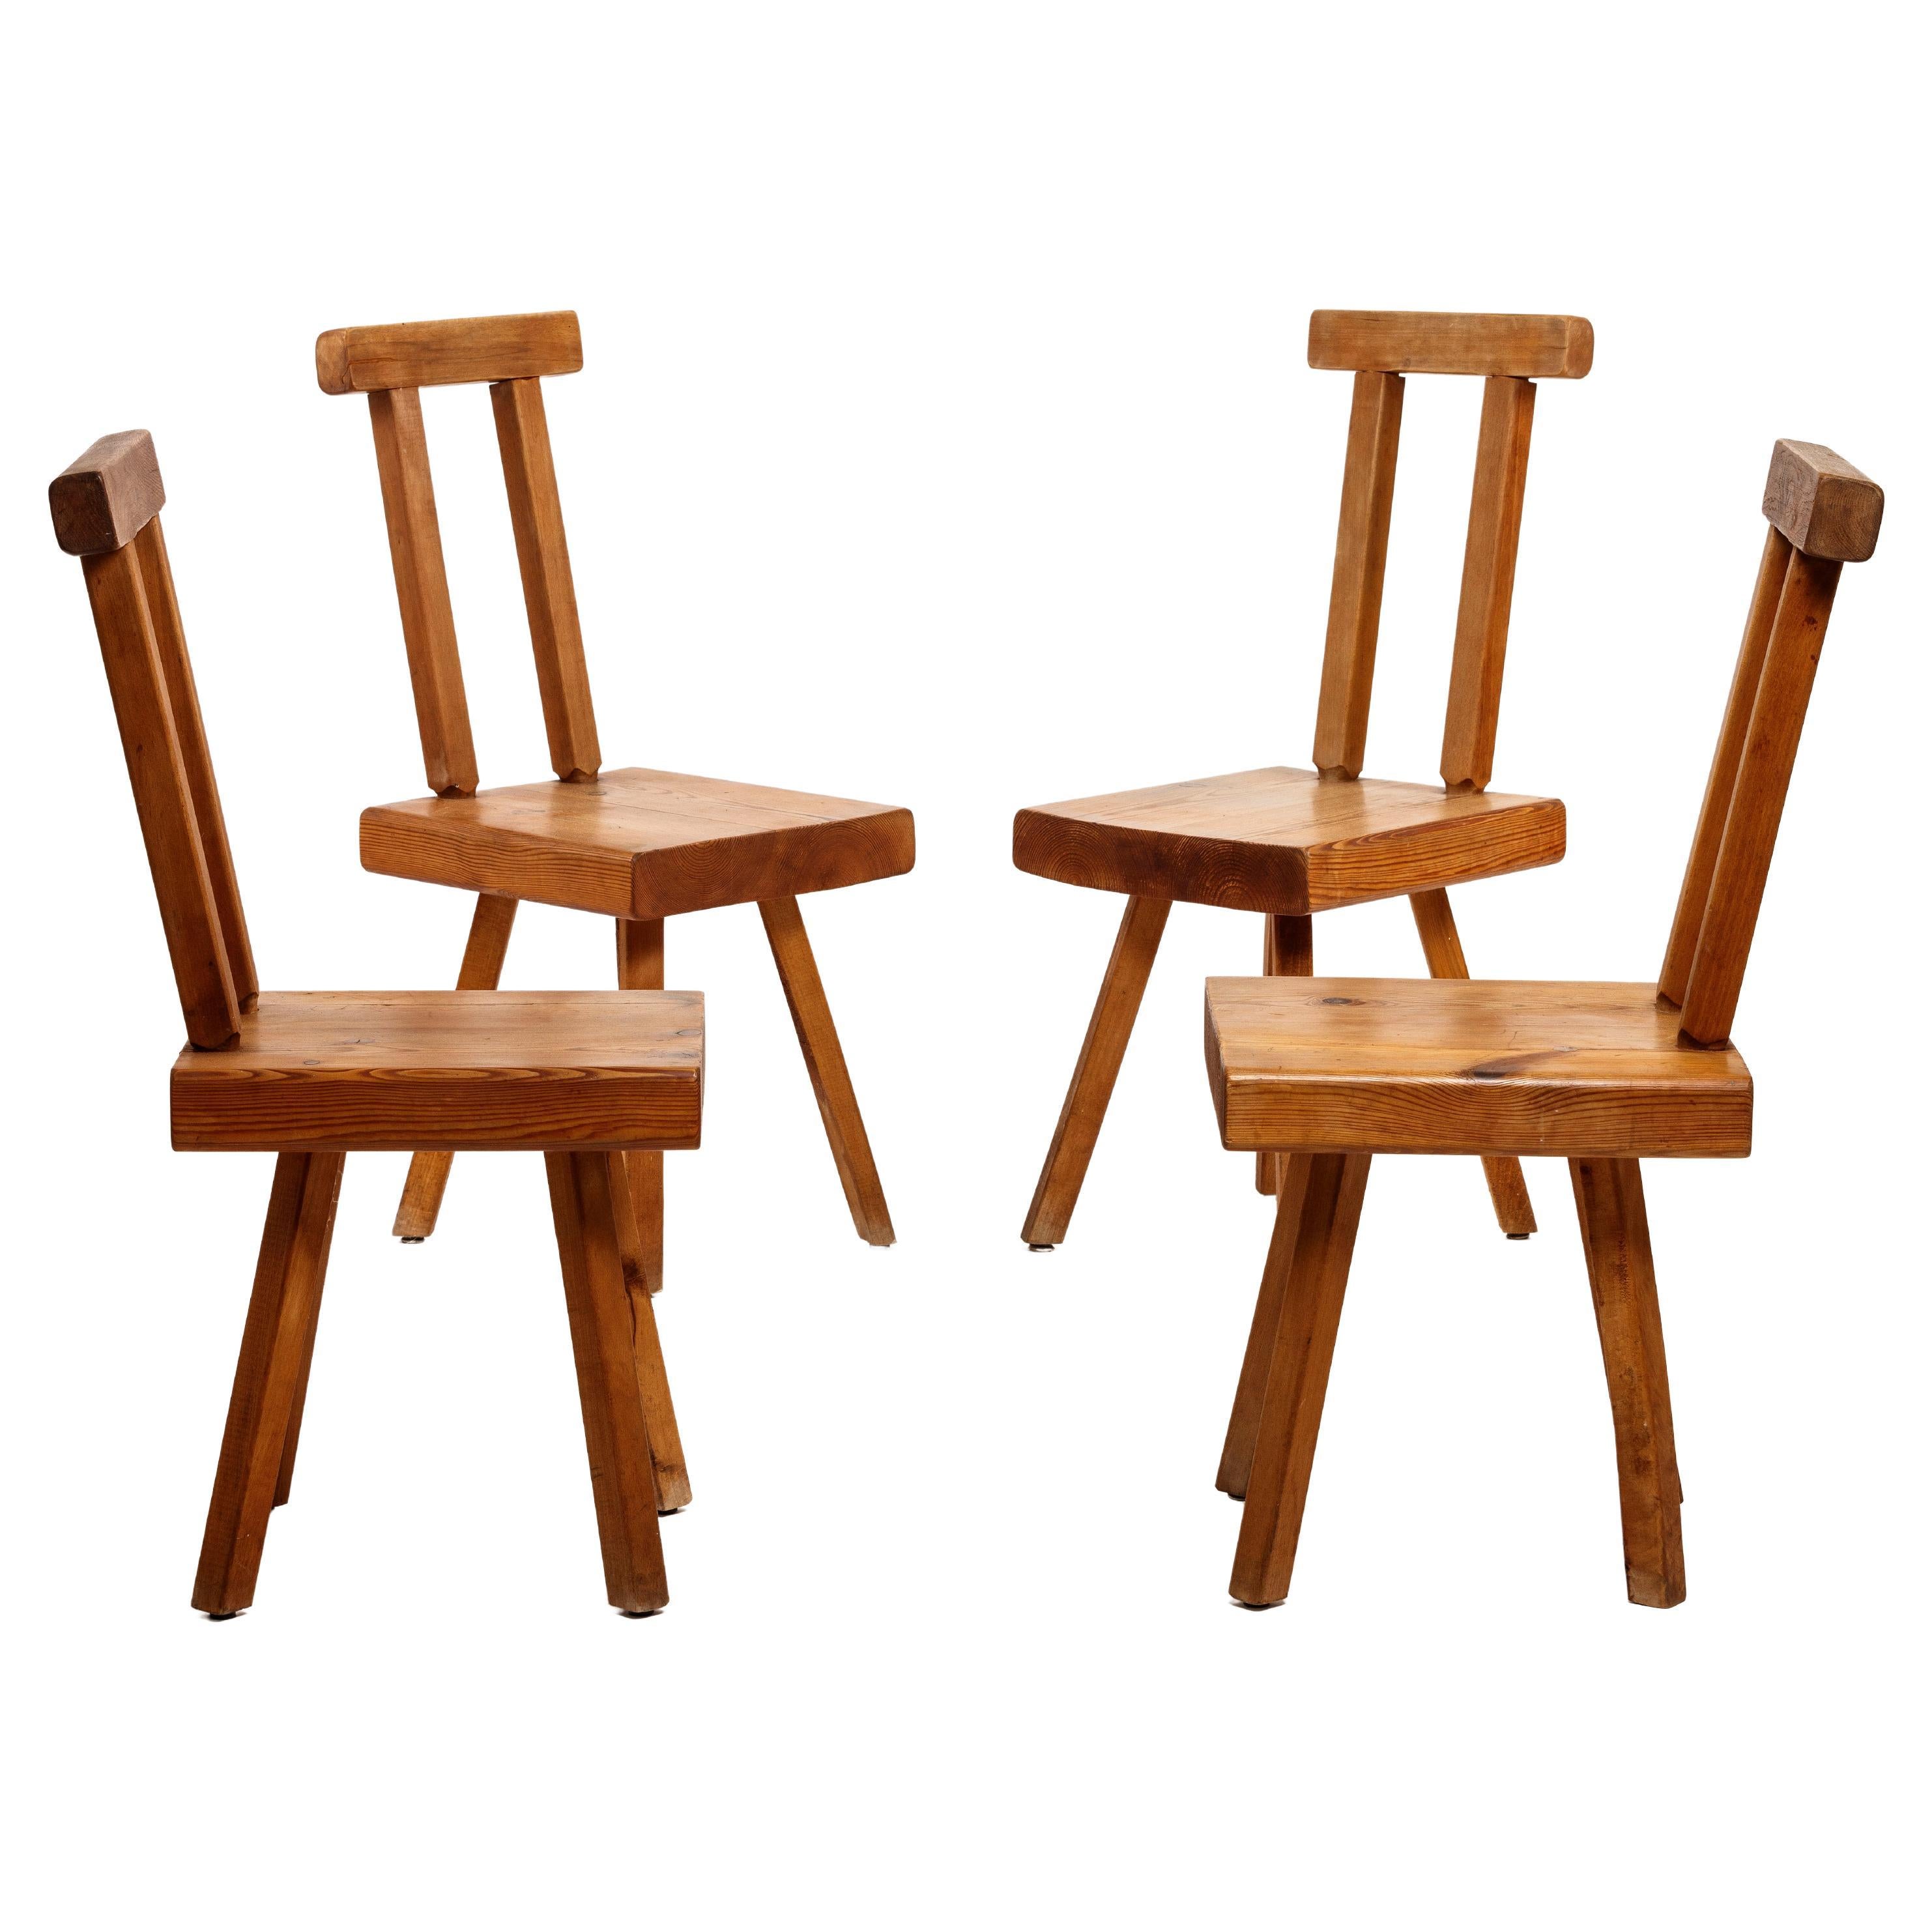 Mobichalet Brutalist set of 4 Solid Wood Chairs 1960